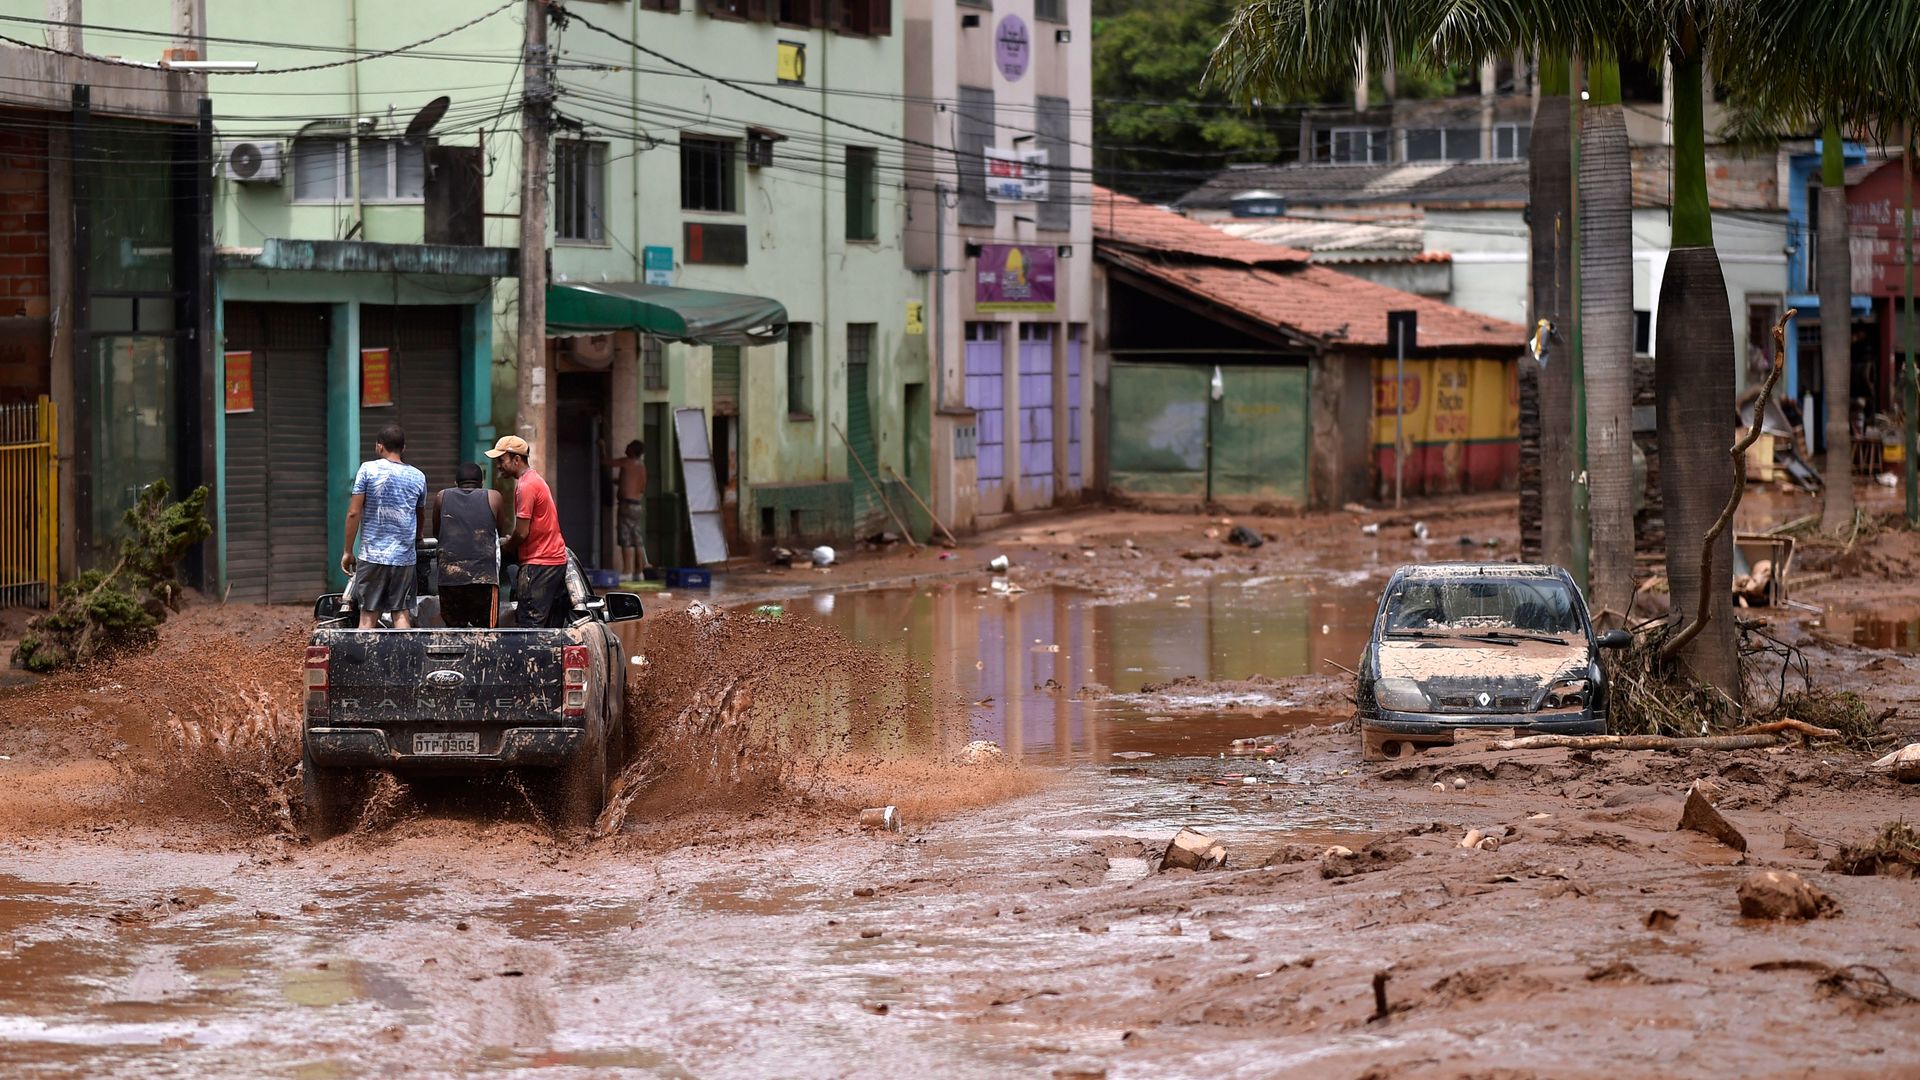 A truck rides along a flooded street after the overflowing of the Das Velhas River in Sabara